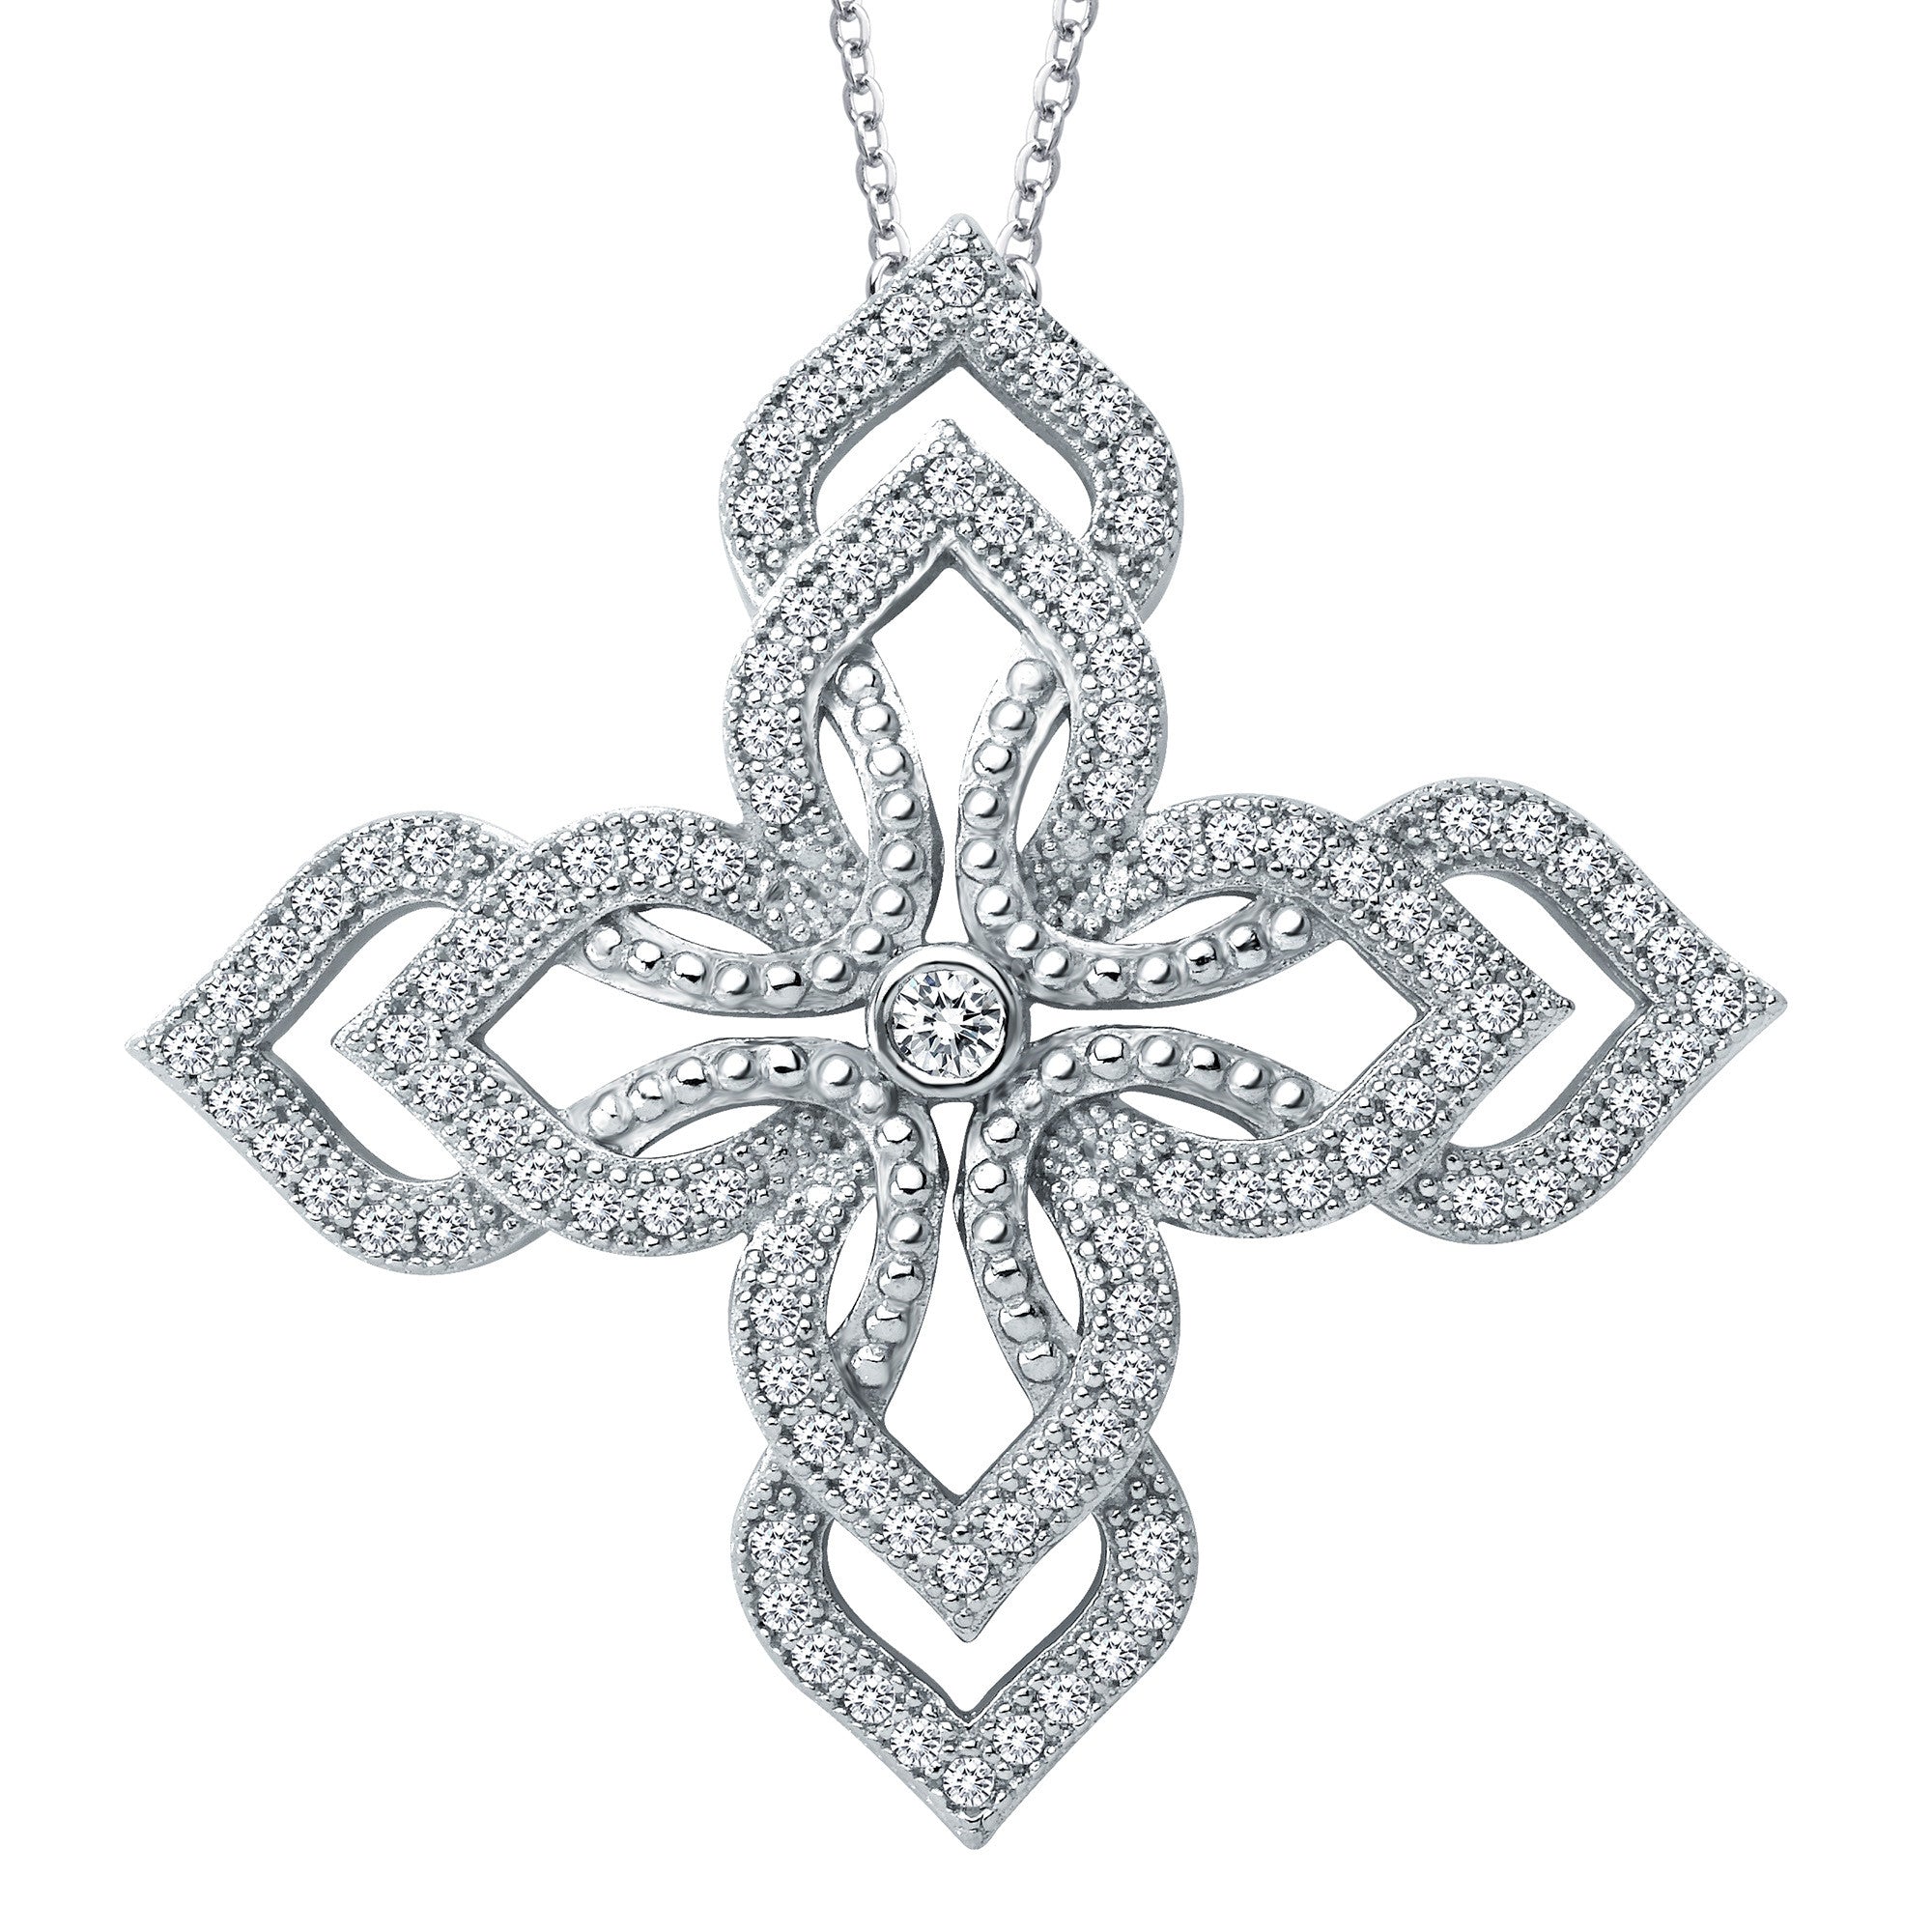 Simulated Diamonds Sterling Silver and Platinum Floral Necklace by Lafonn